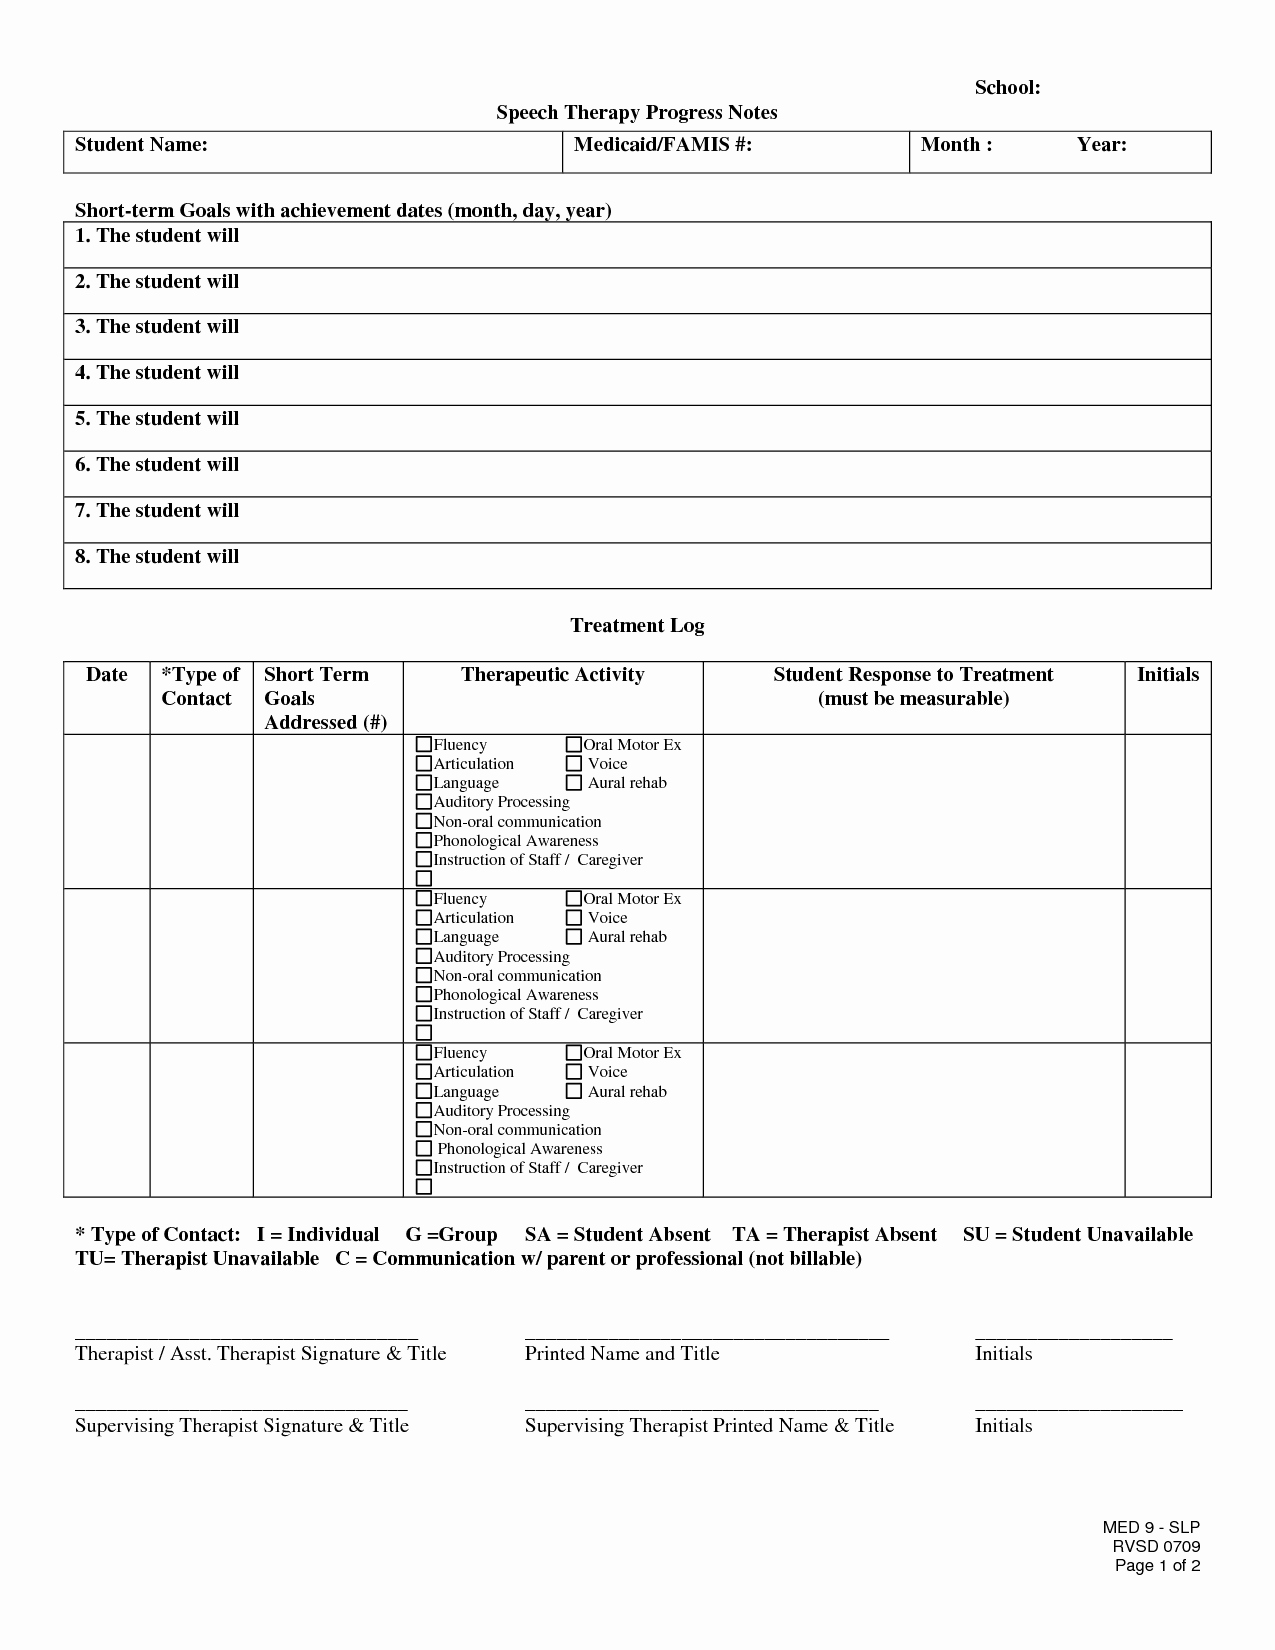 Physical therapy Progress Note Template Unique 10 Best Of School Speech therapy Notes Physical